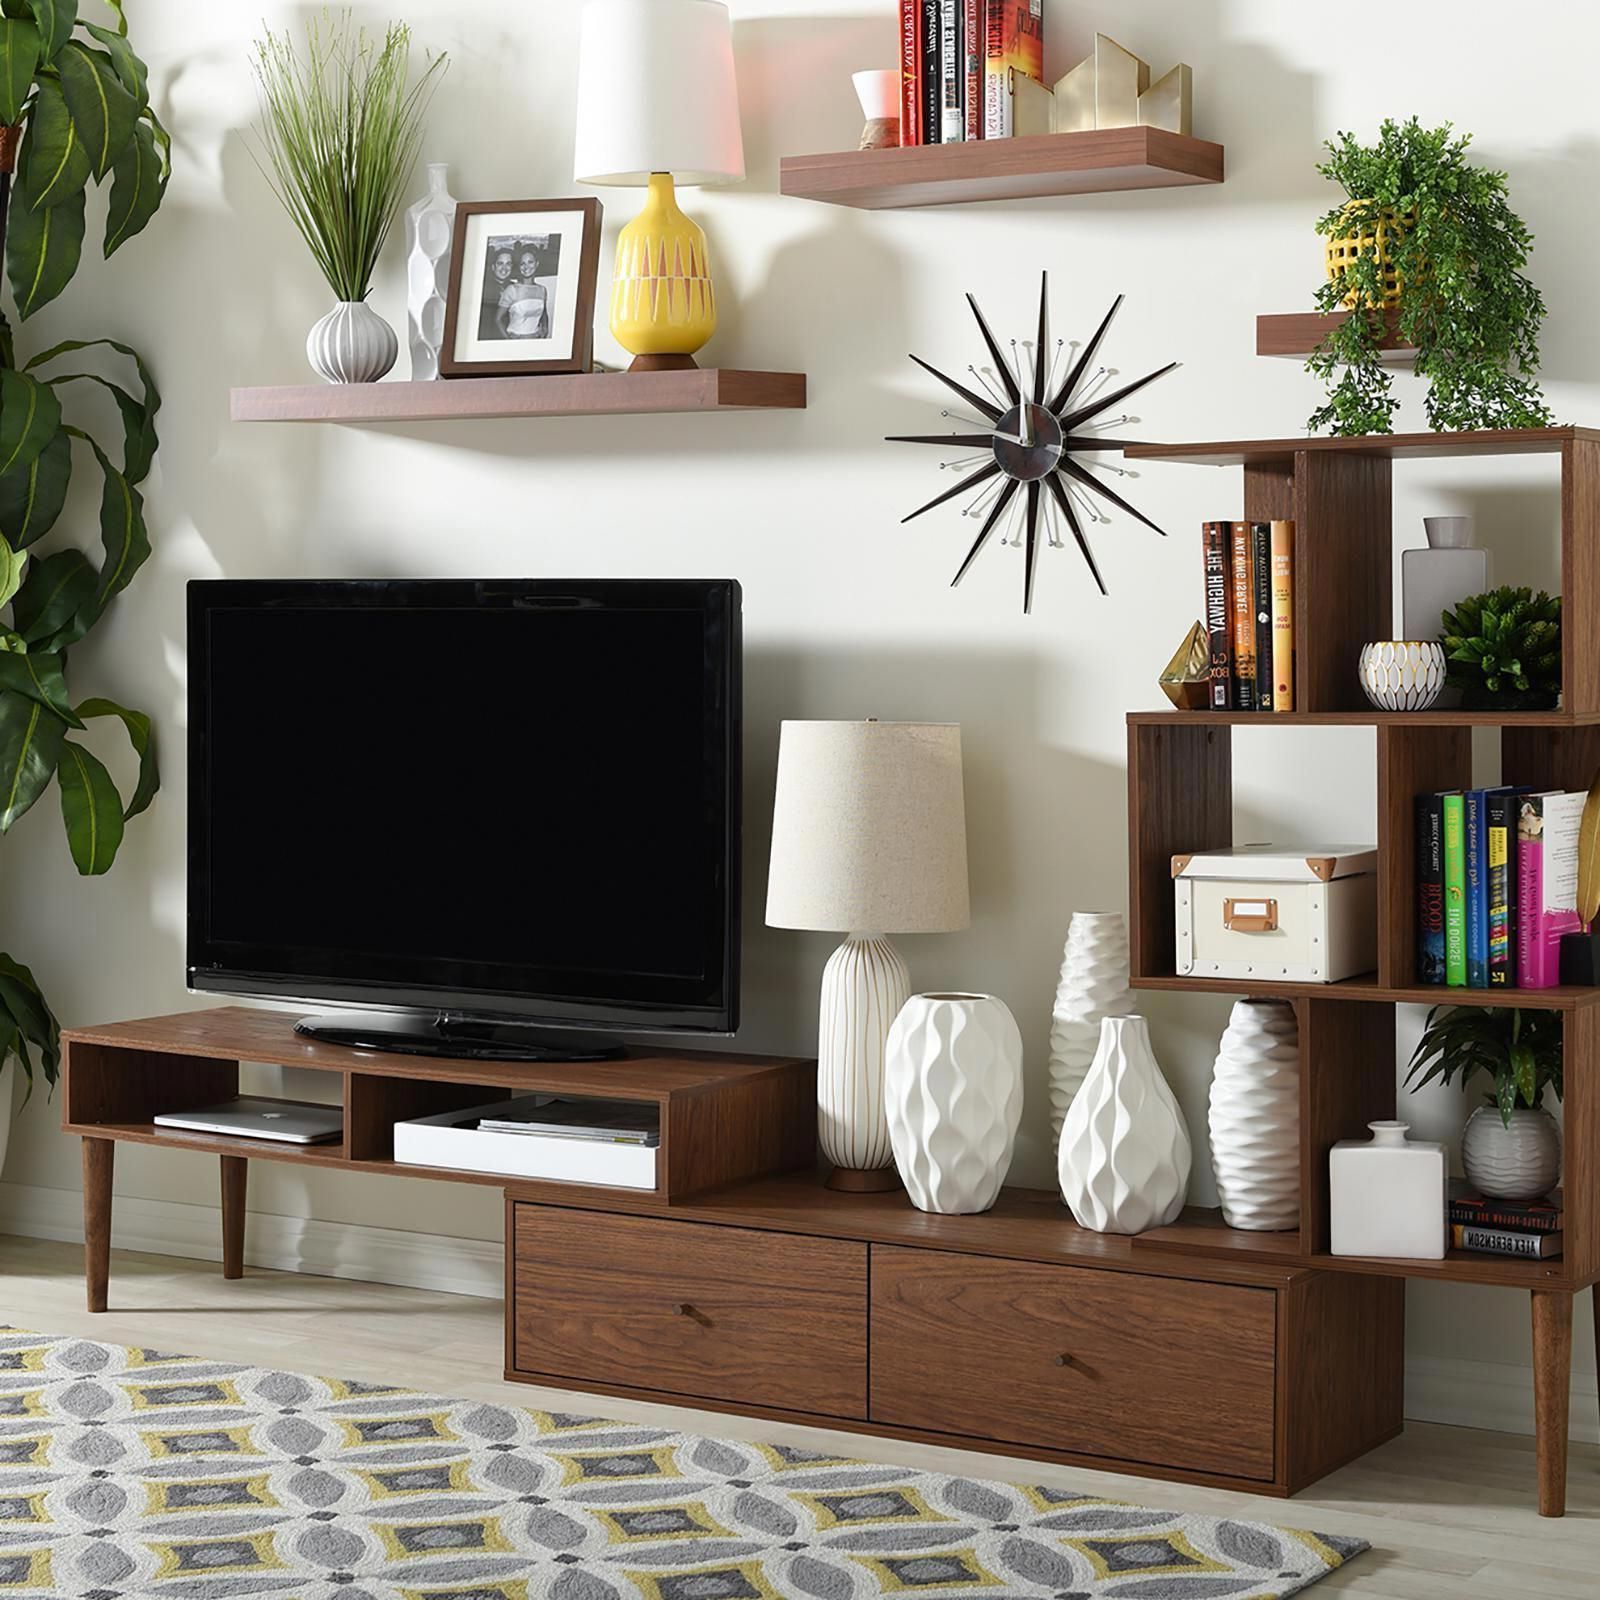 Most Popular Mid Century Entertainment Centers In Current And Present Day Furniture To Suit Every Style And Budget (View 14 of 15)